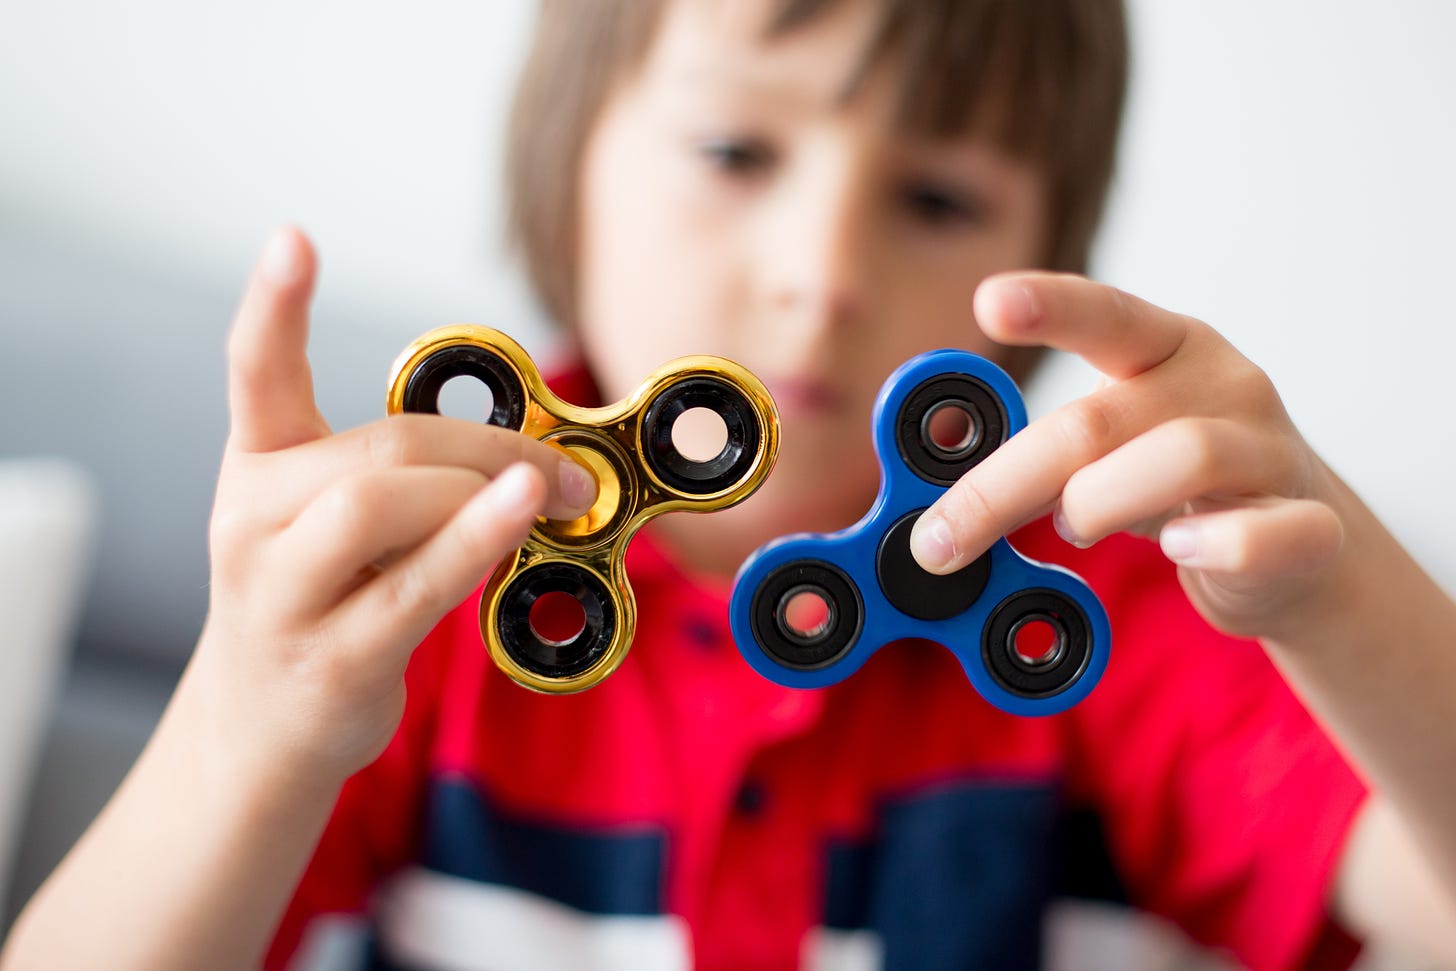 Using Fidget Spinners May Actually Impede Learning – Research Digest